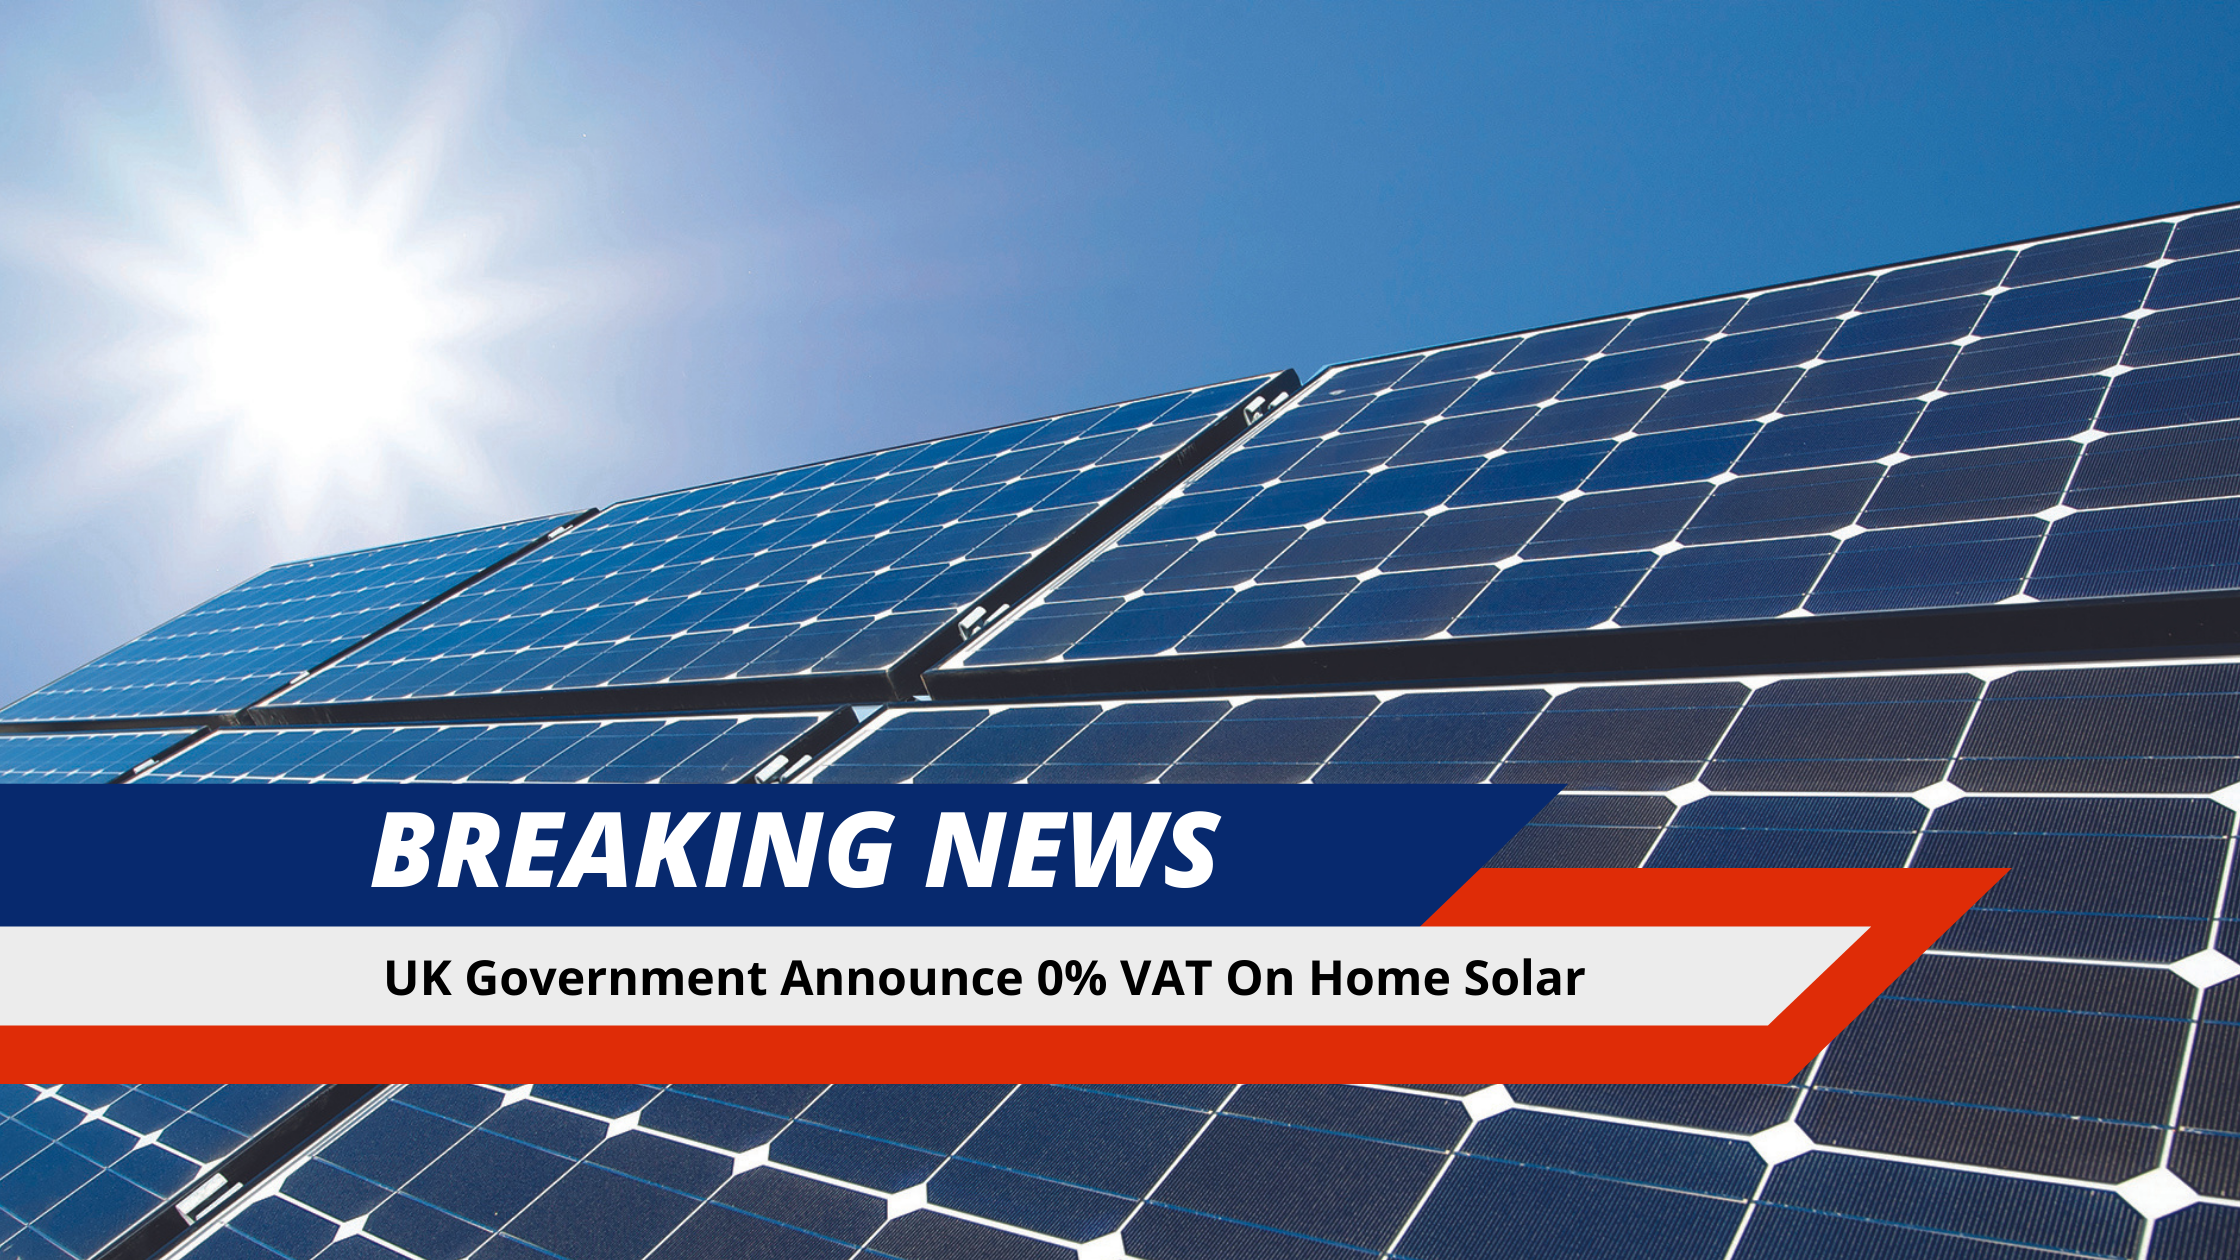 UK Government Announce 0% VAT On Home Solar For The Next 5 Years!